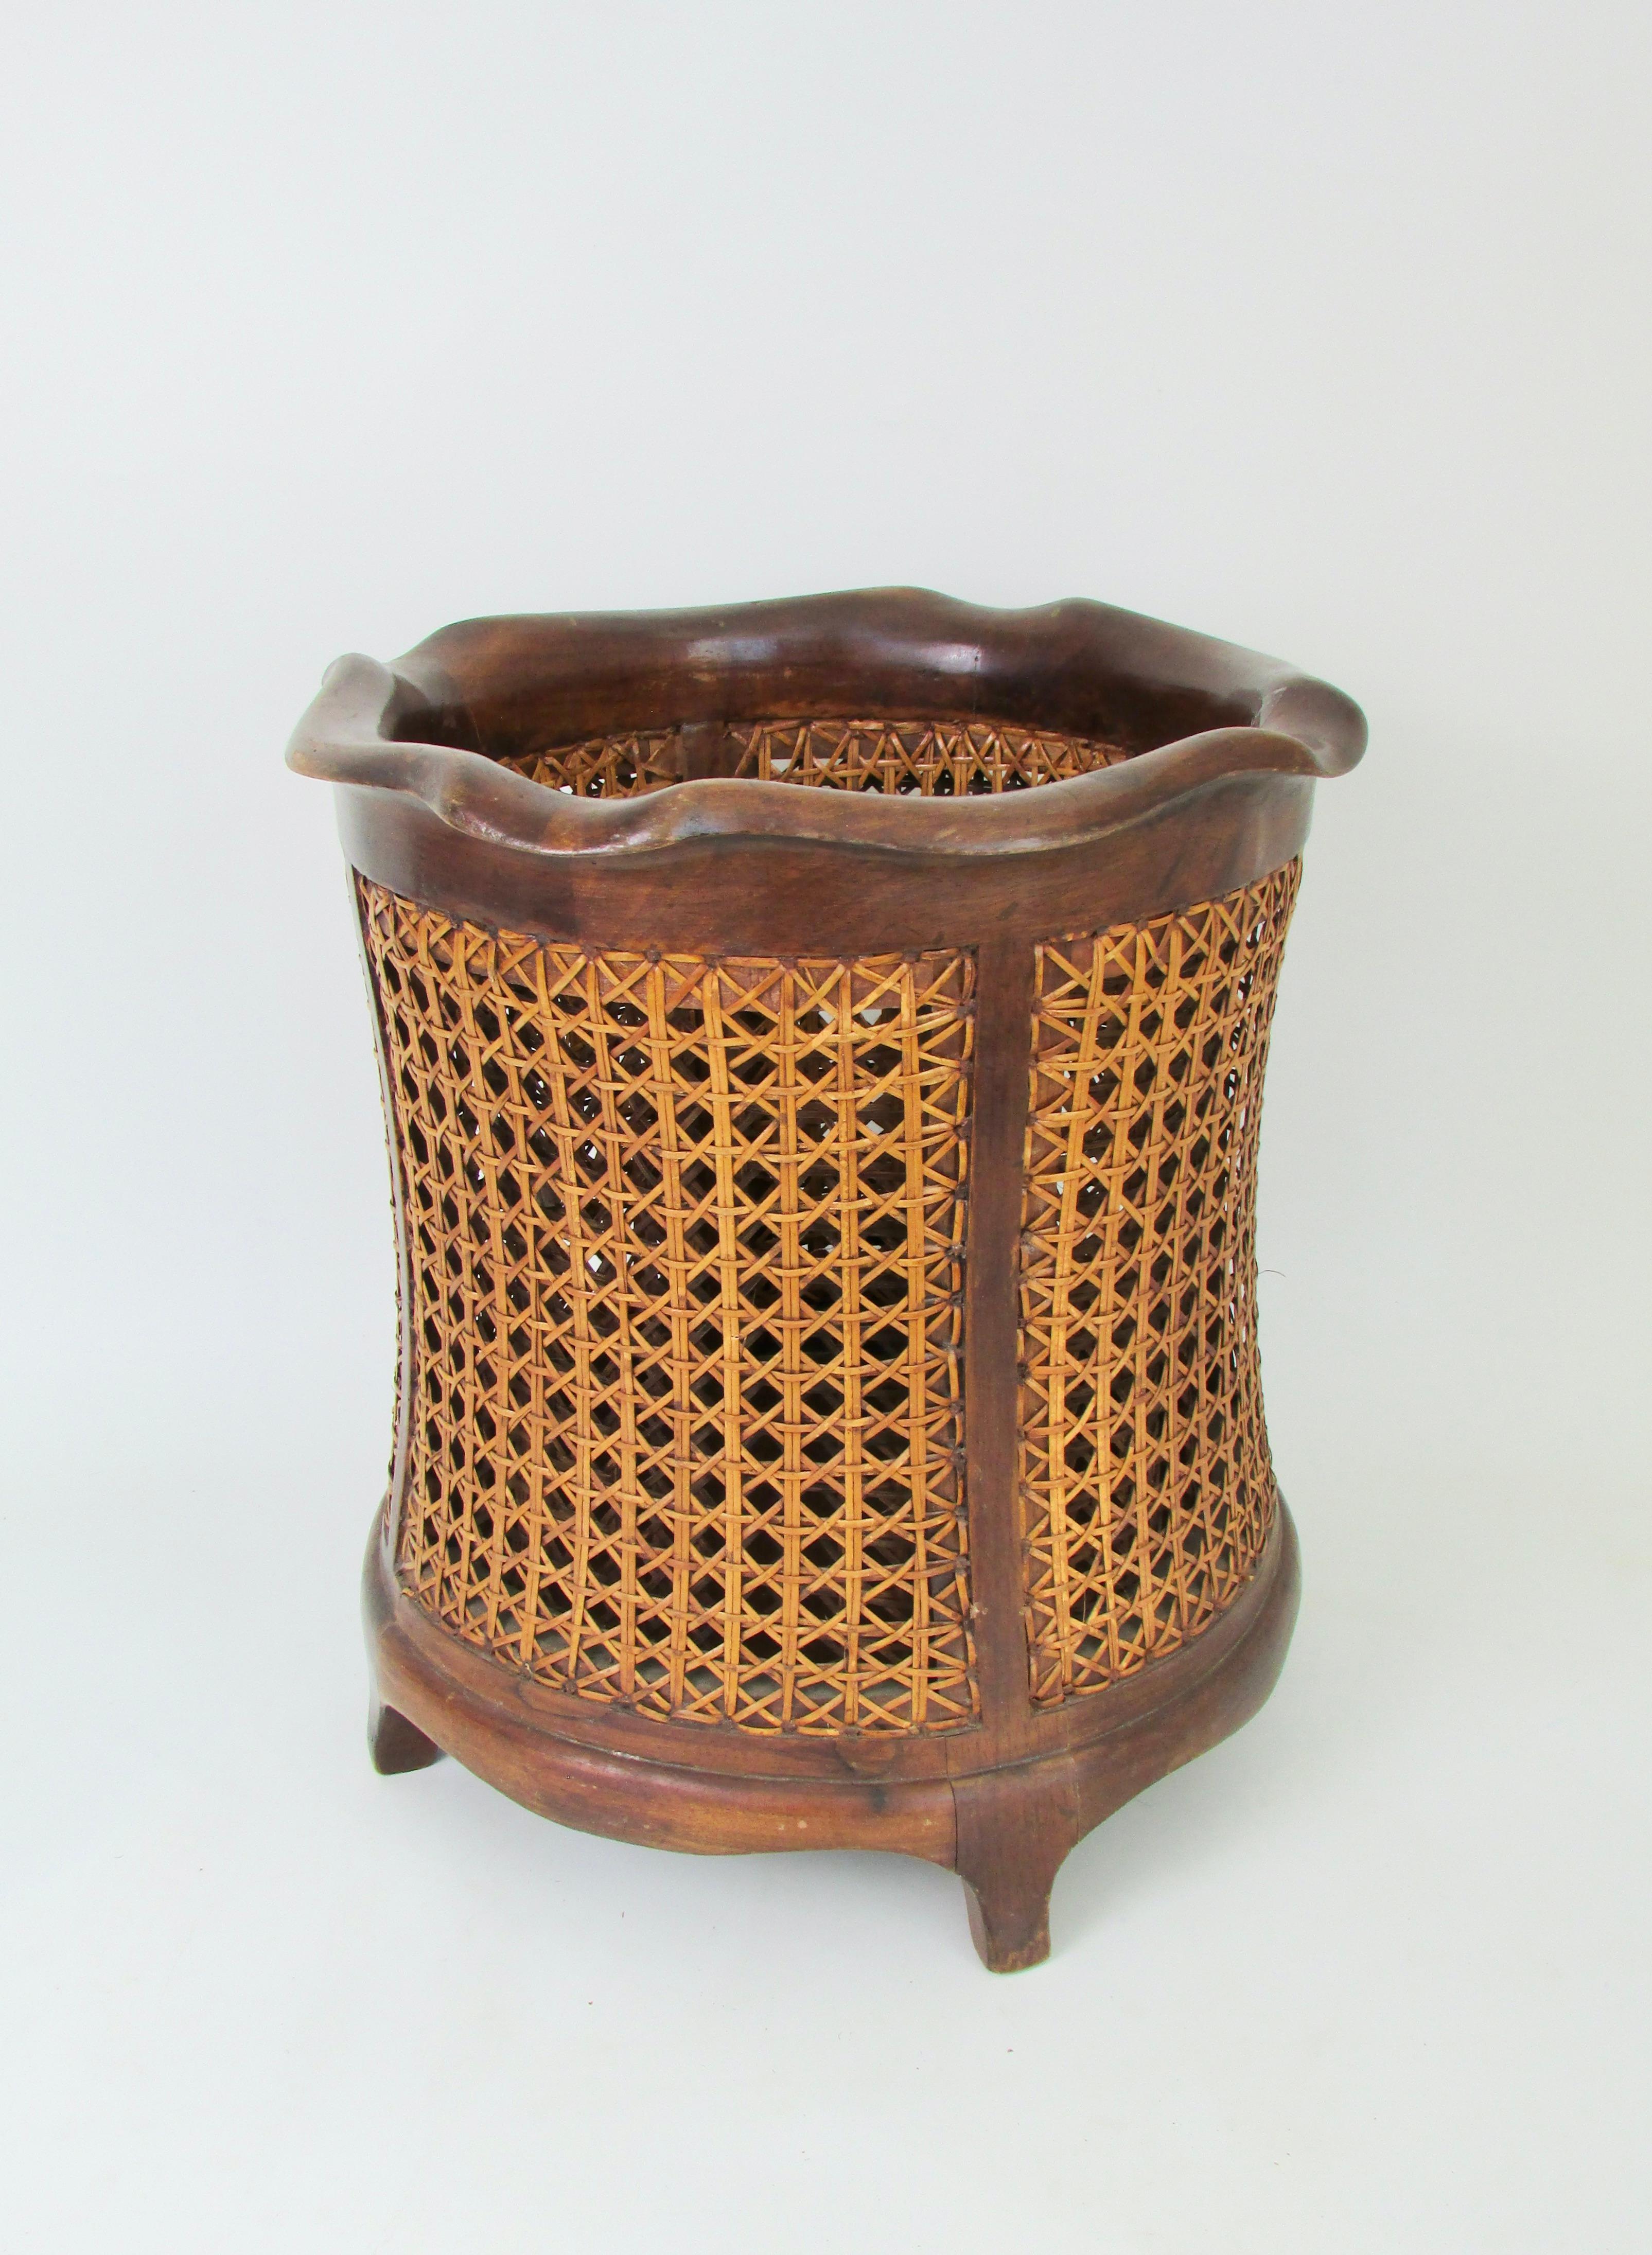 Cane Classic Italian solid walnut waste basket with hand caned side panels